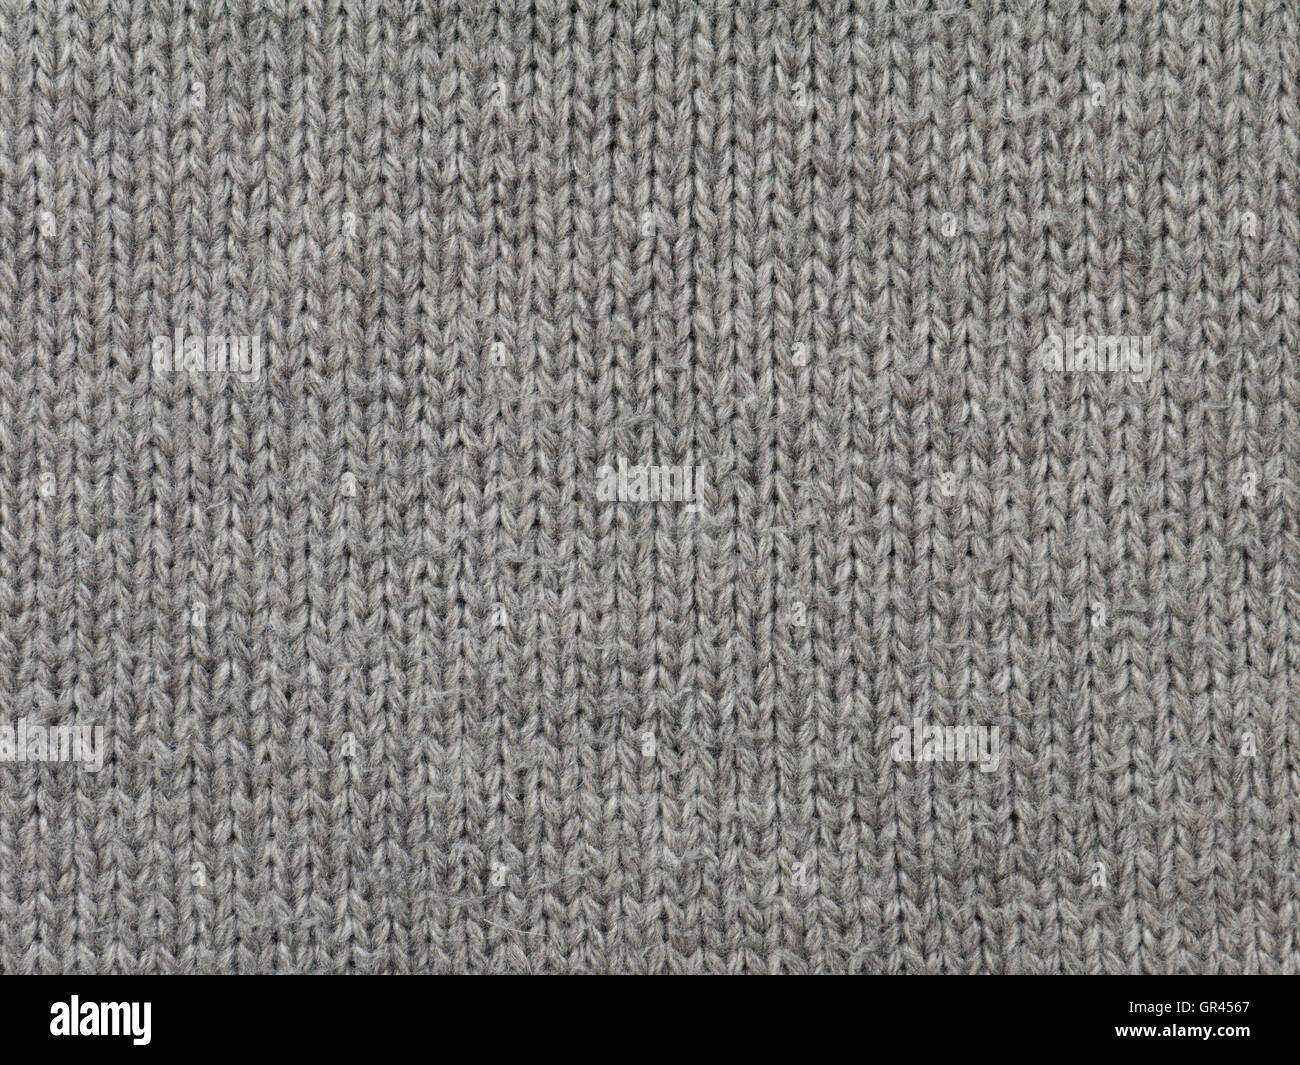 Dark brown knitted wool fabric cool weather background Stock Photo